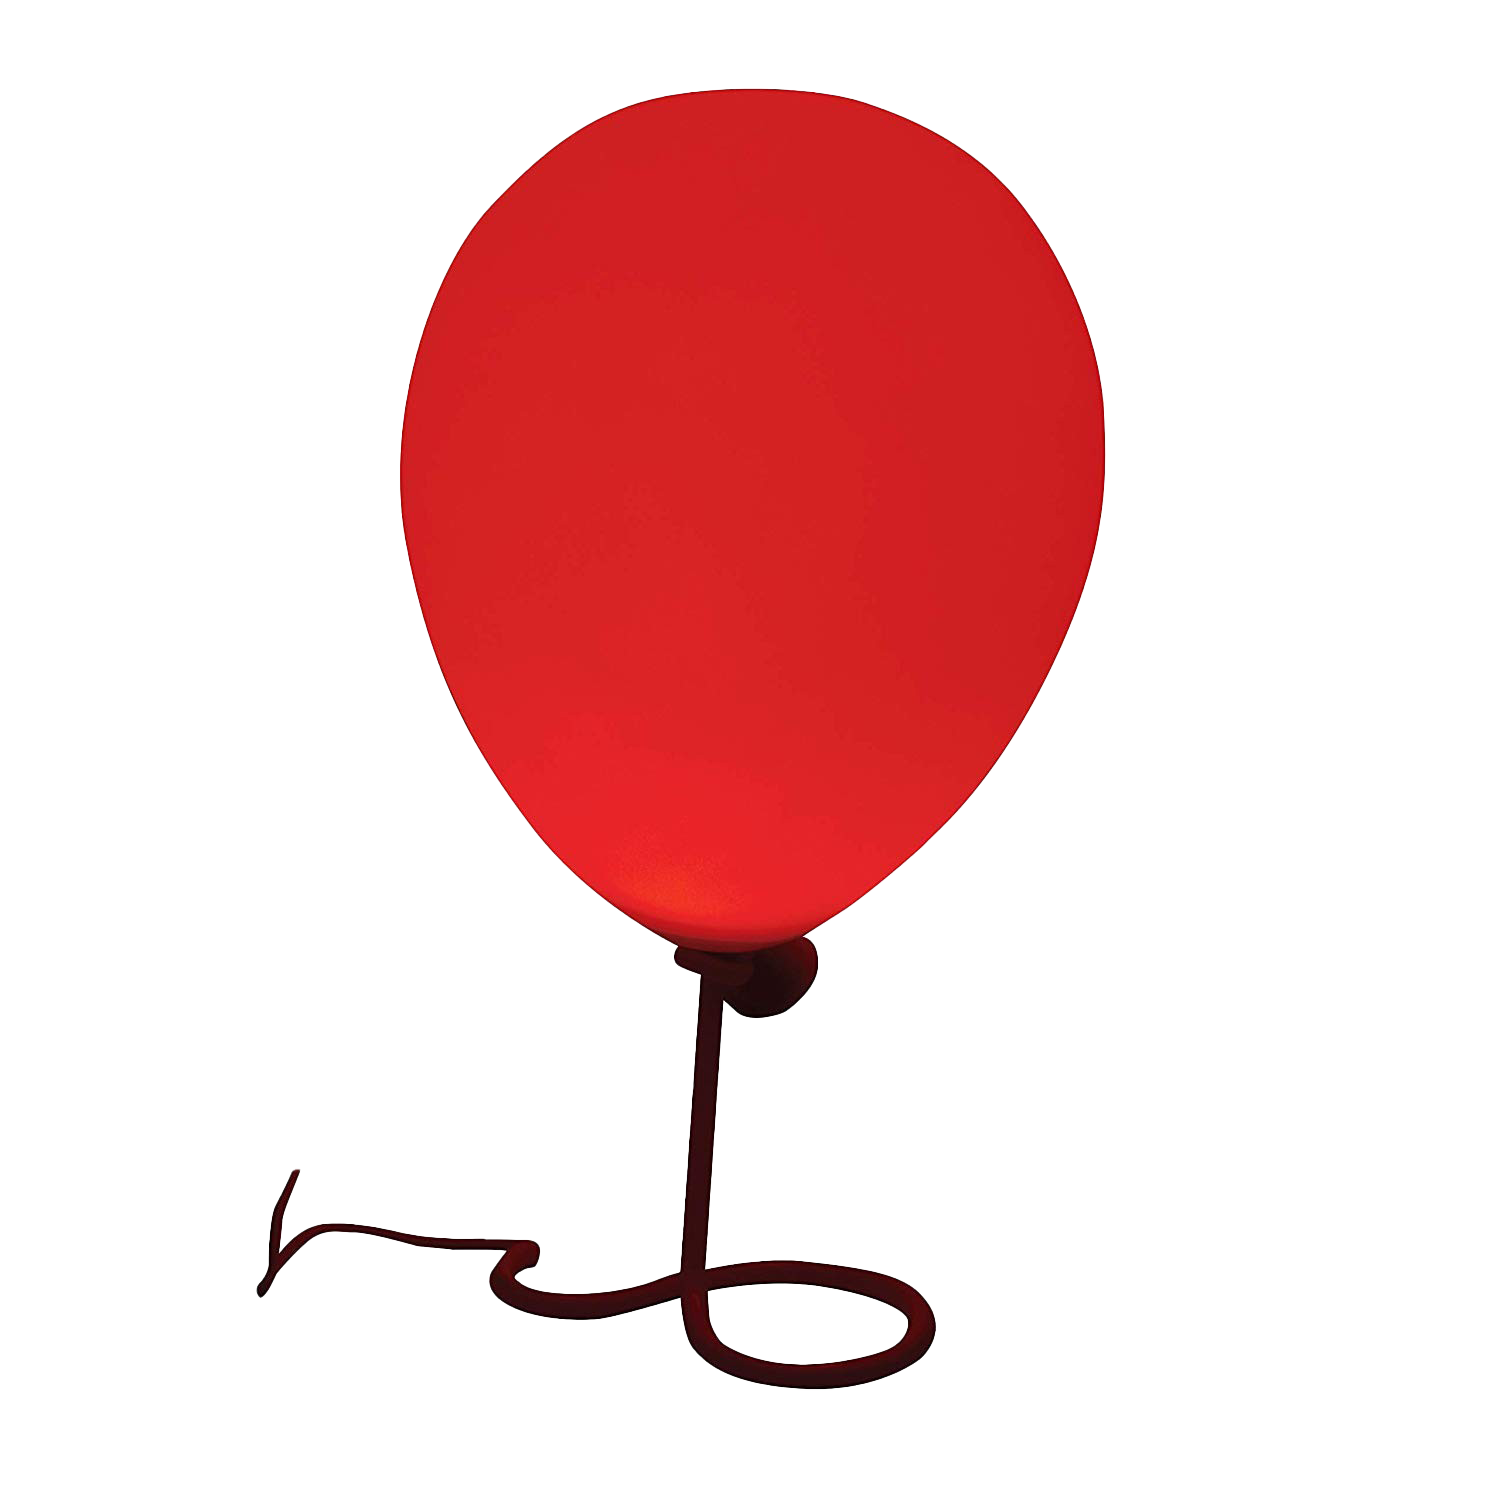 Pennywise Balloon GRATUIT PNG Image